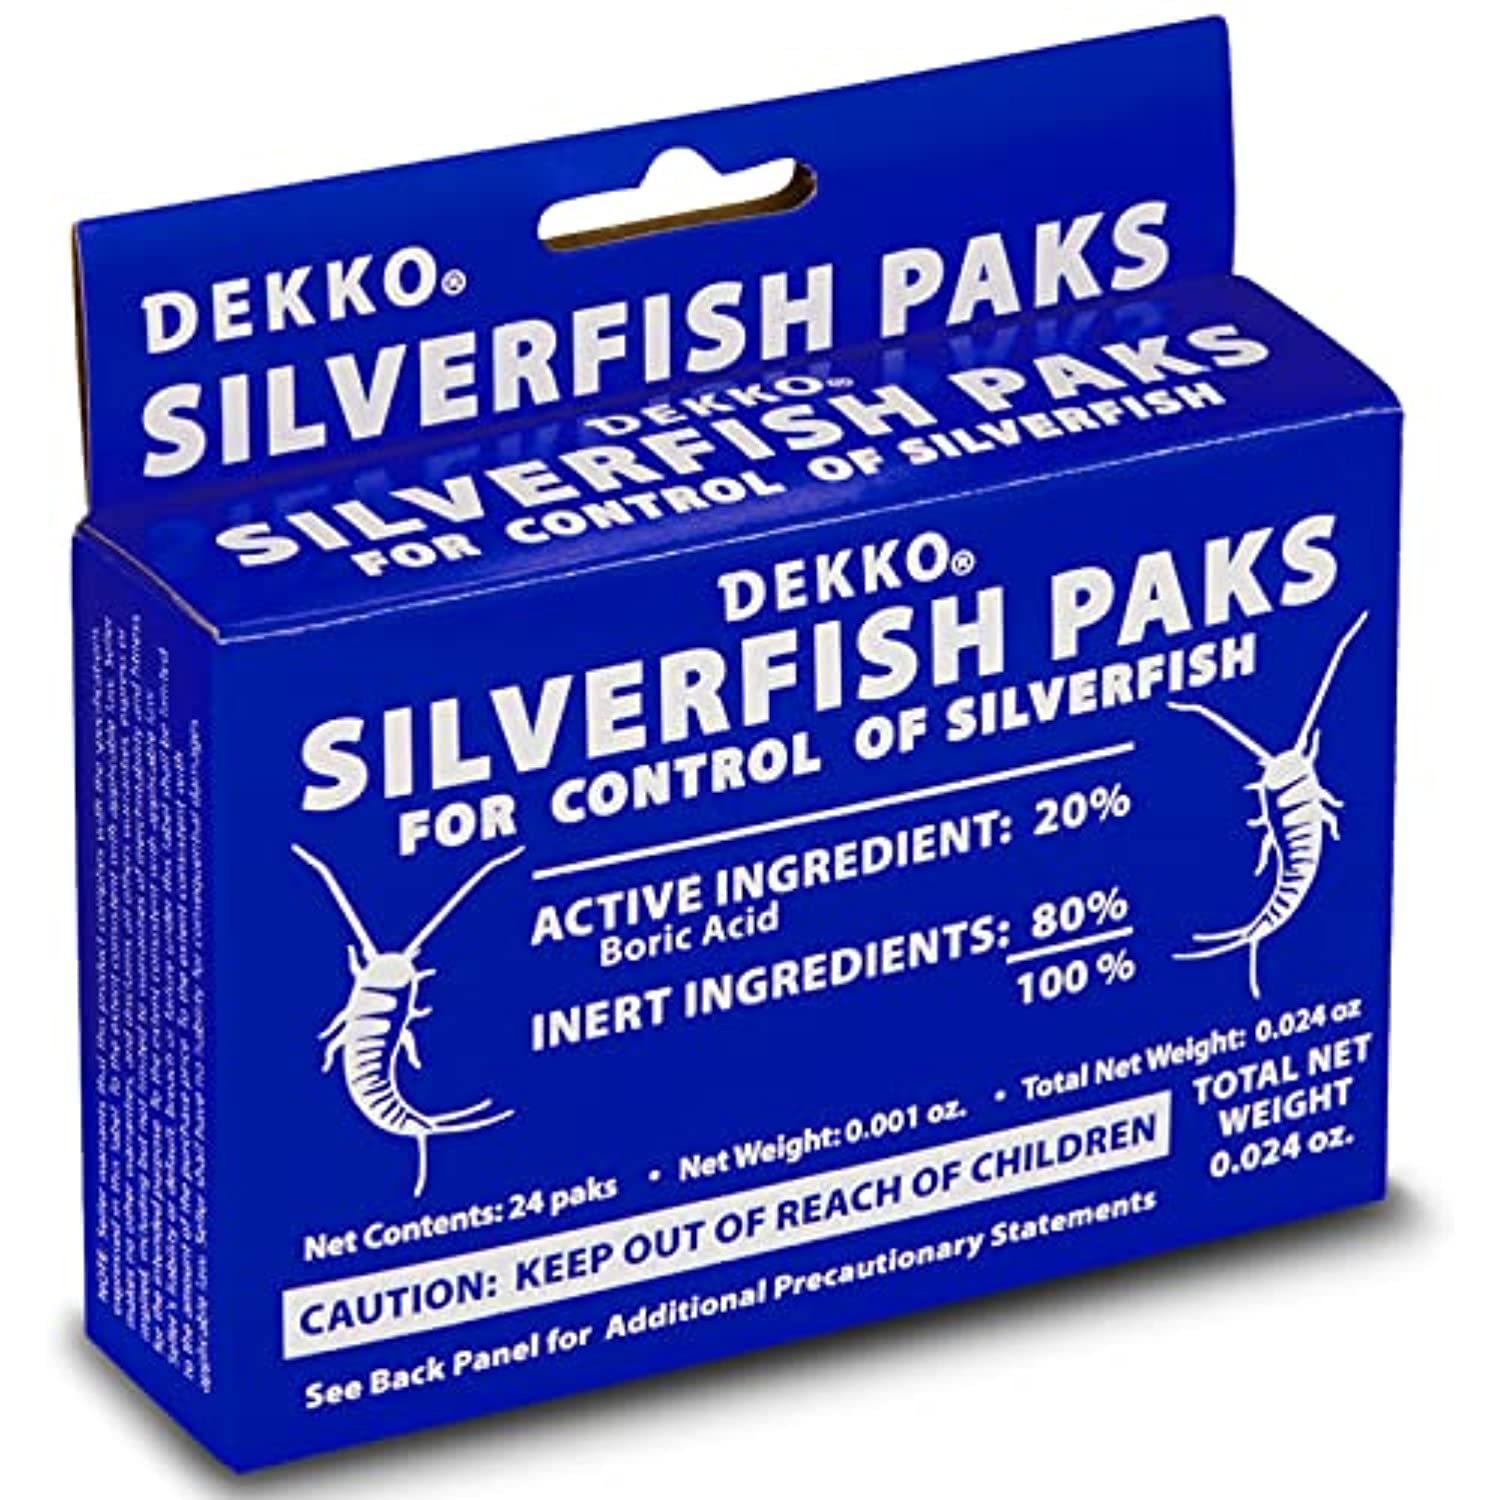 Dekko Silverfish Paks Perfect Indoor and Outdoor Household Solution Eco Friendly Available with Premium Quality Centaurus AZ Gloves- 1 Pack